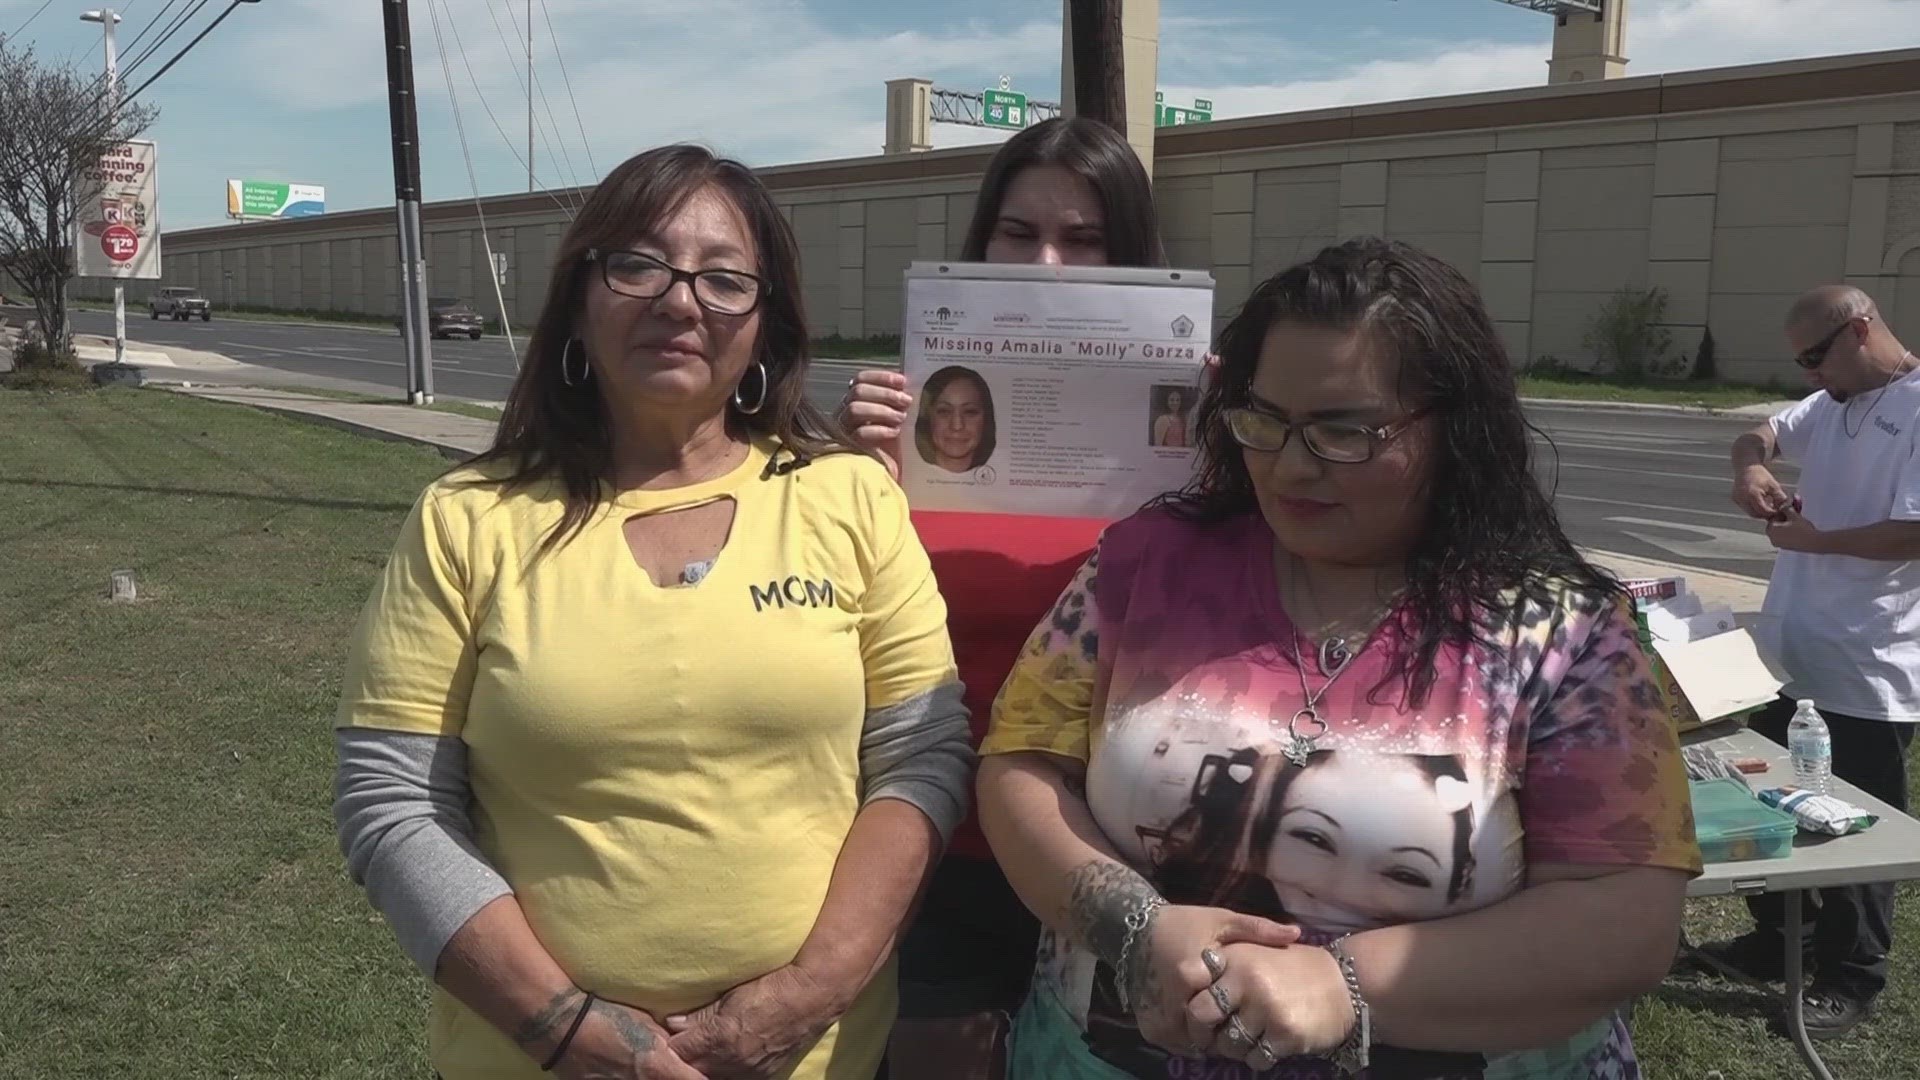 The family of Amalia Garza is still searching for answers six years after her disappearance.